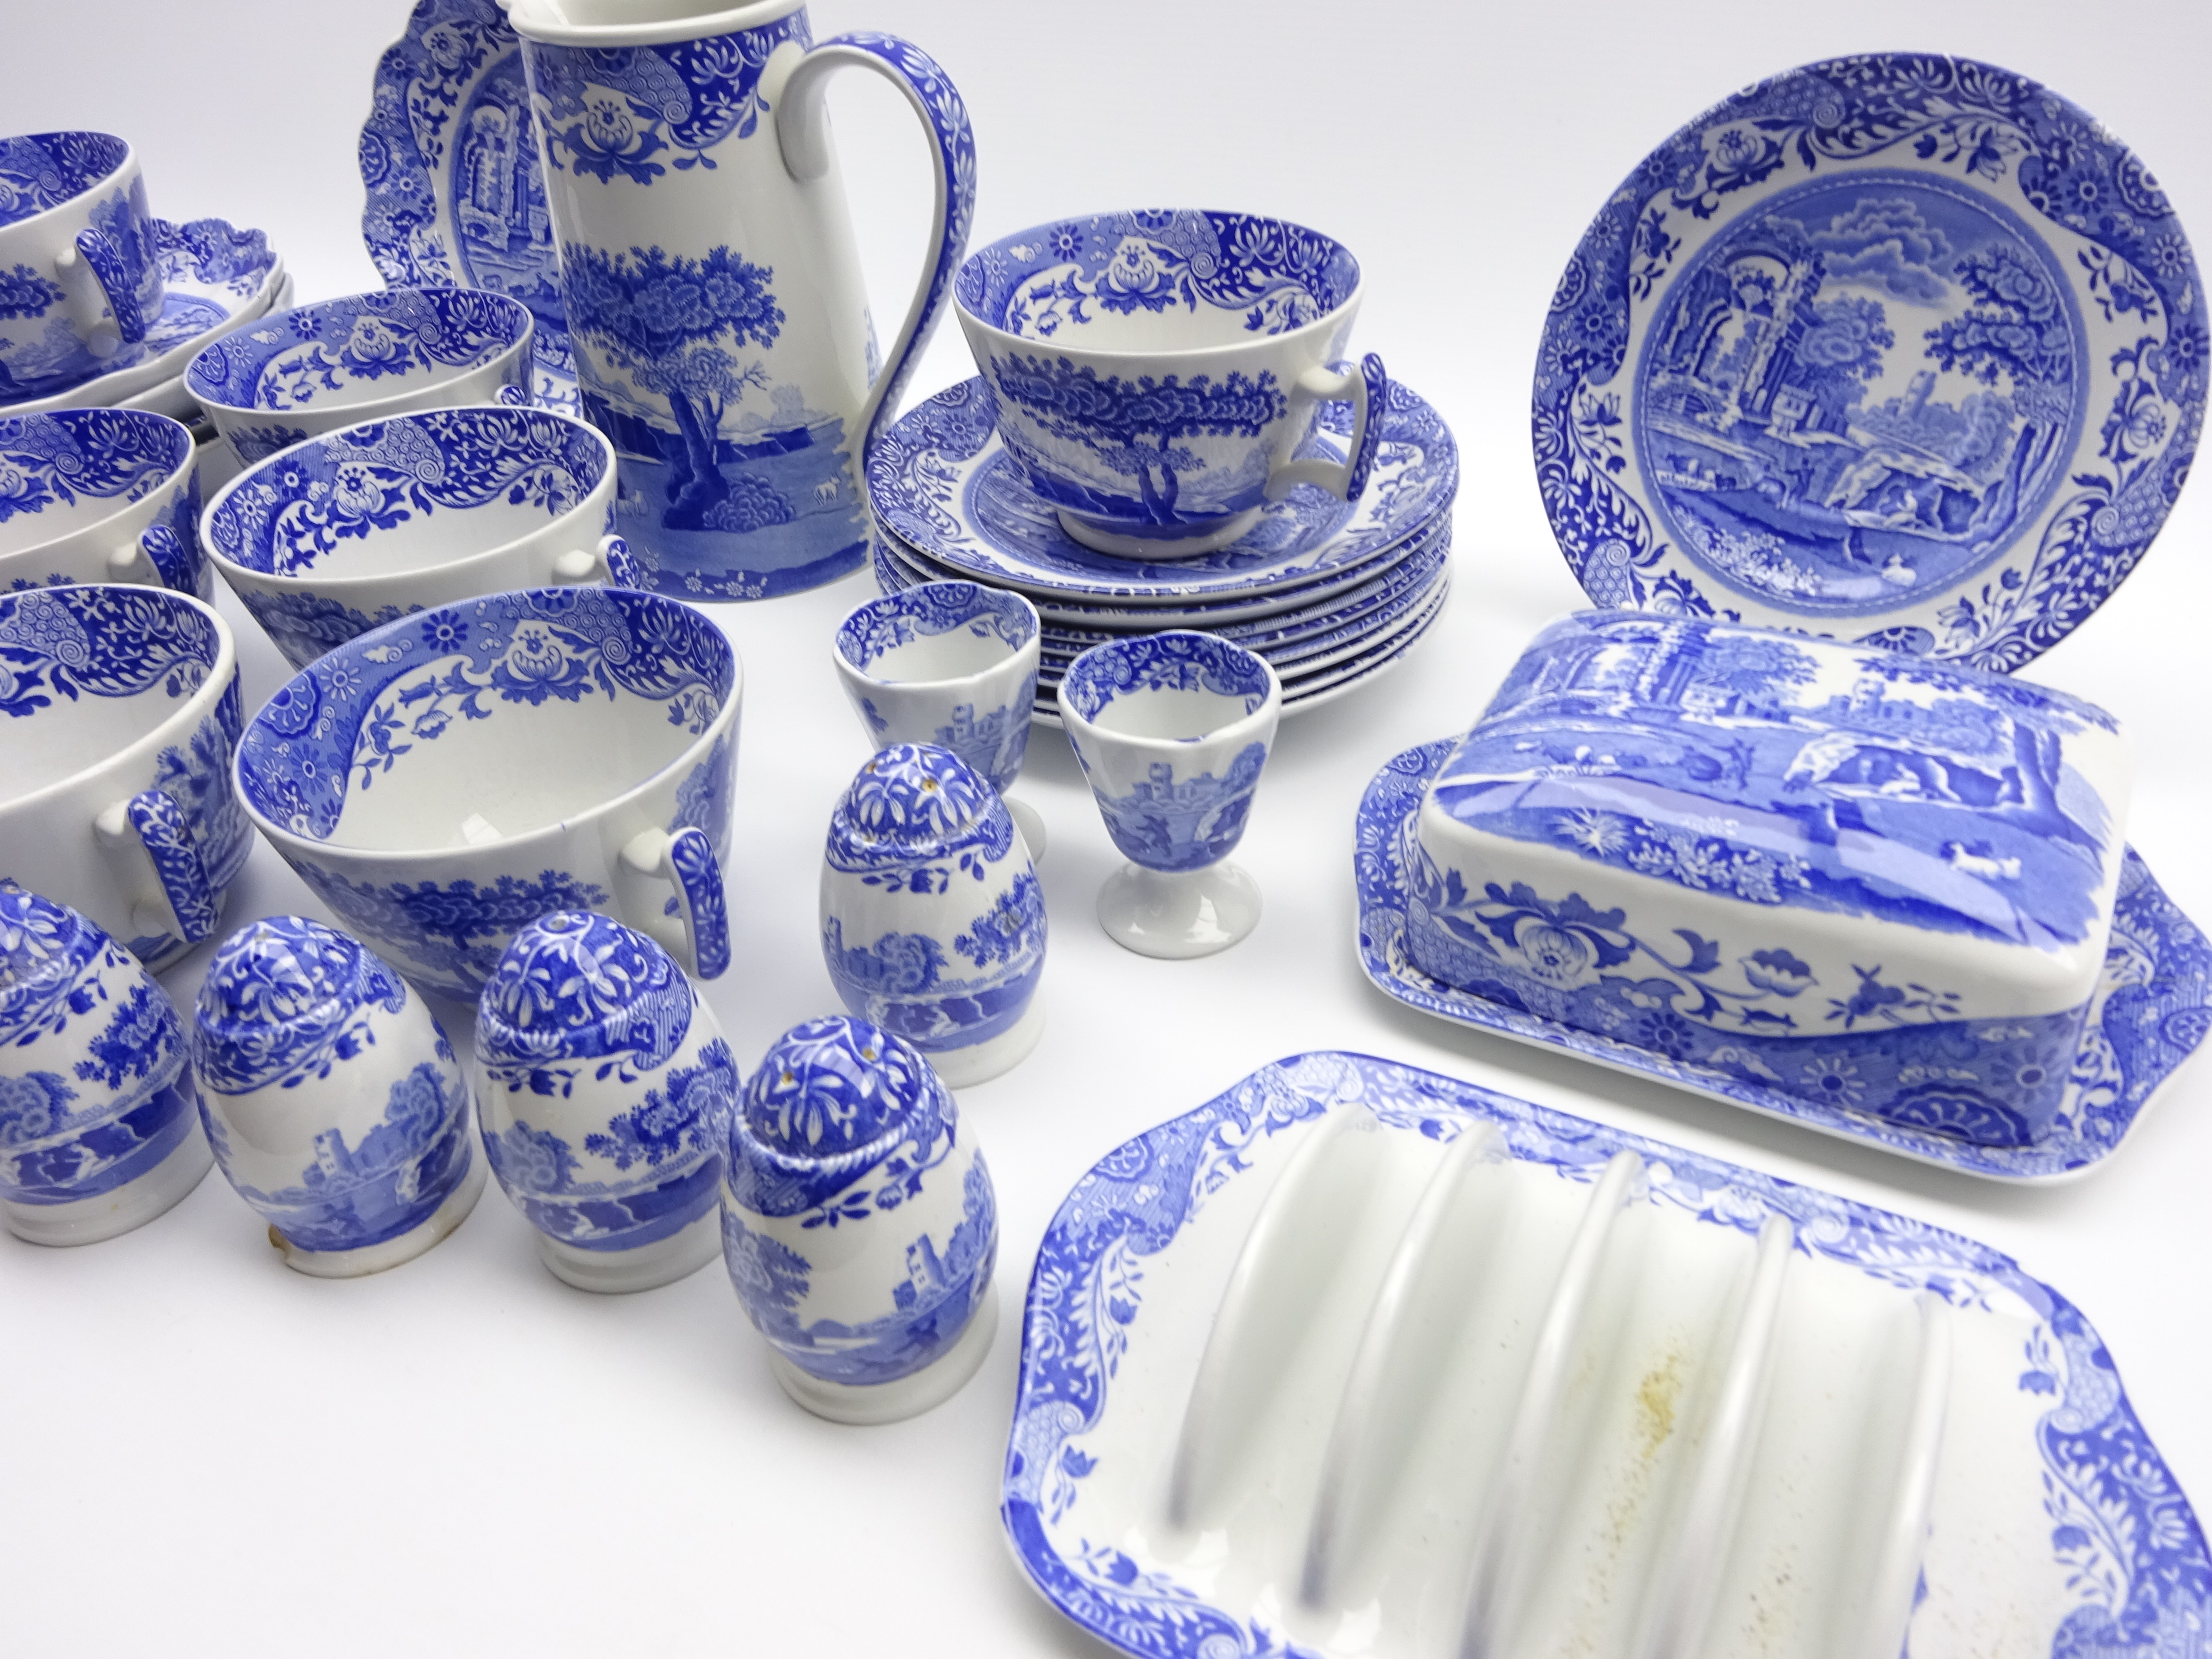 Nine Spode Italian pattern breakfast cups and saucers, butter dish and cover, toast rack, milk jug, - Image 2 of 3